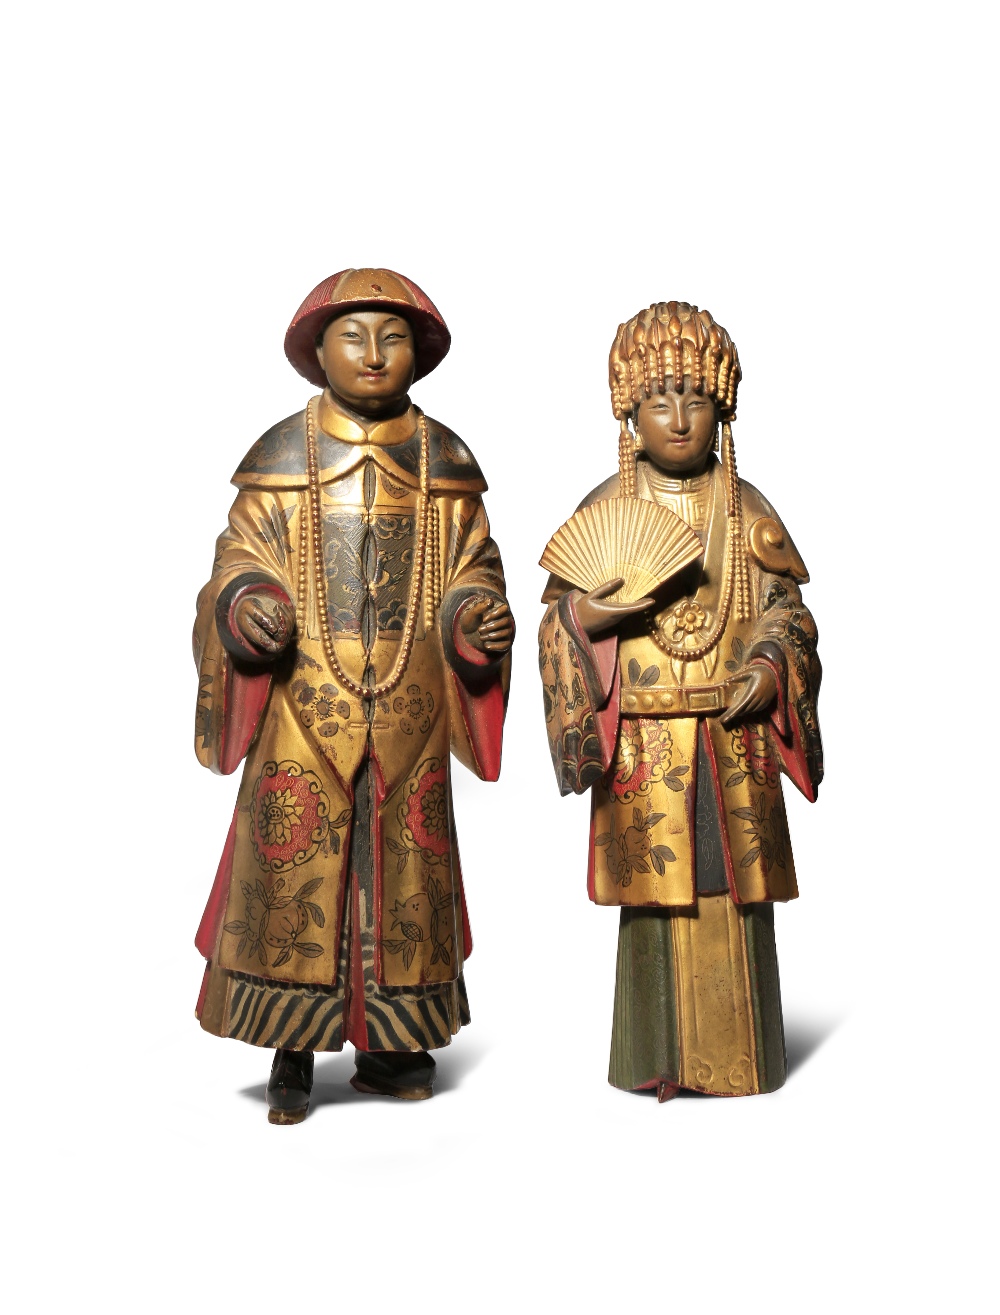 A PAIR OF CHINESE LACQUERED AND GILT-WOOD FIGURES 19TH CENTURY Depicting a gentleman and a lady,